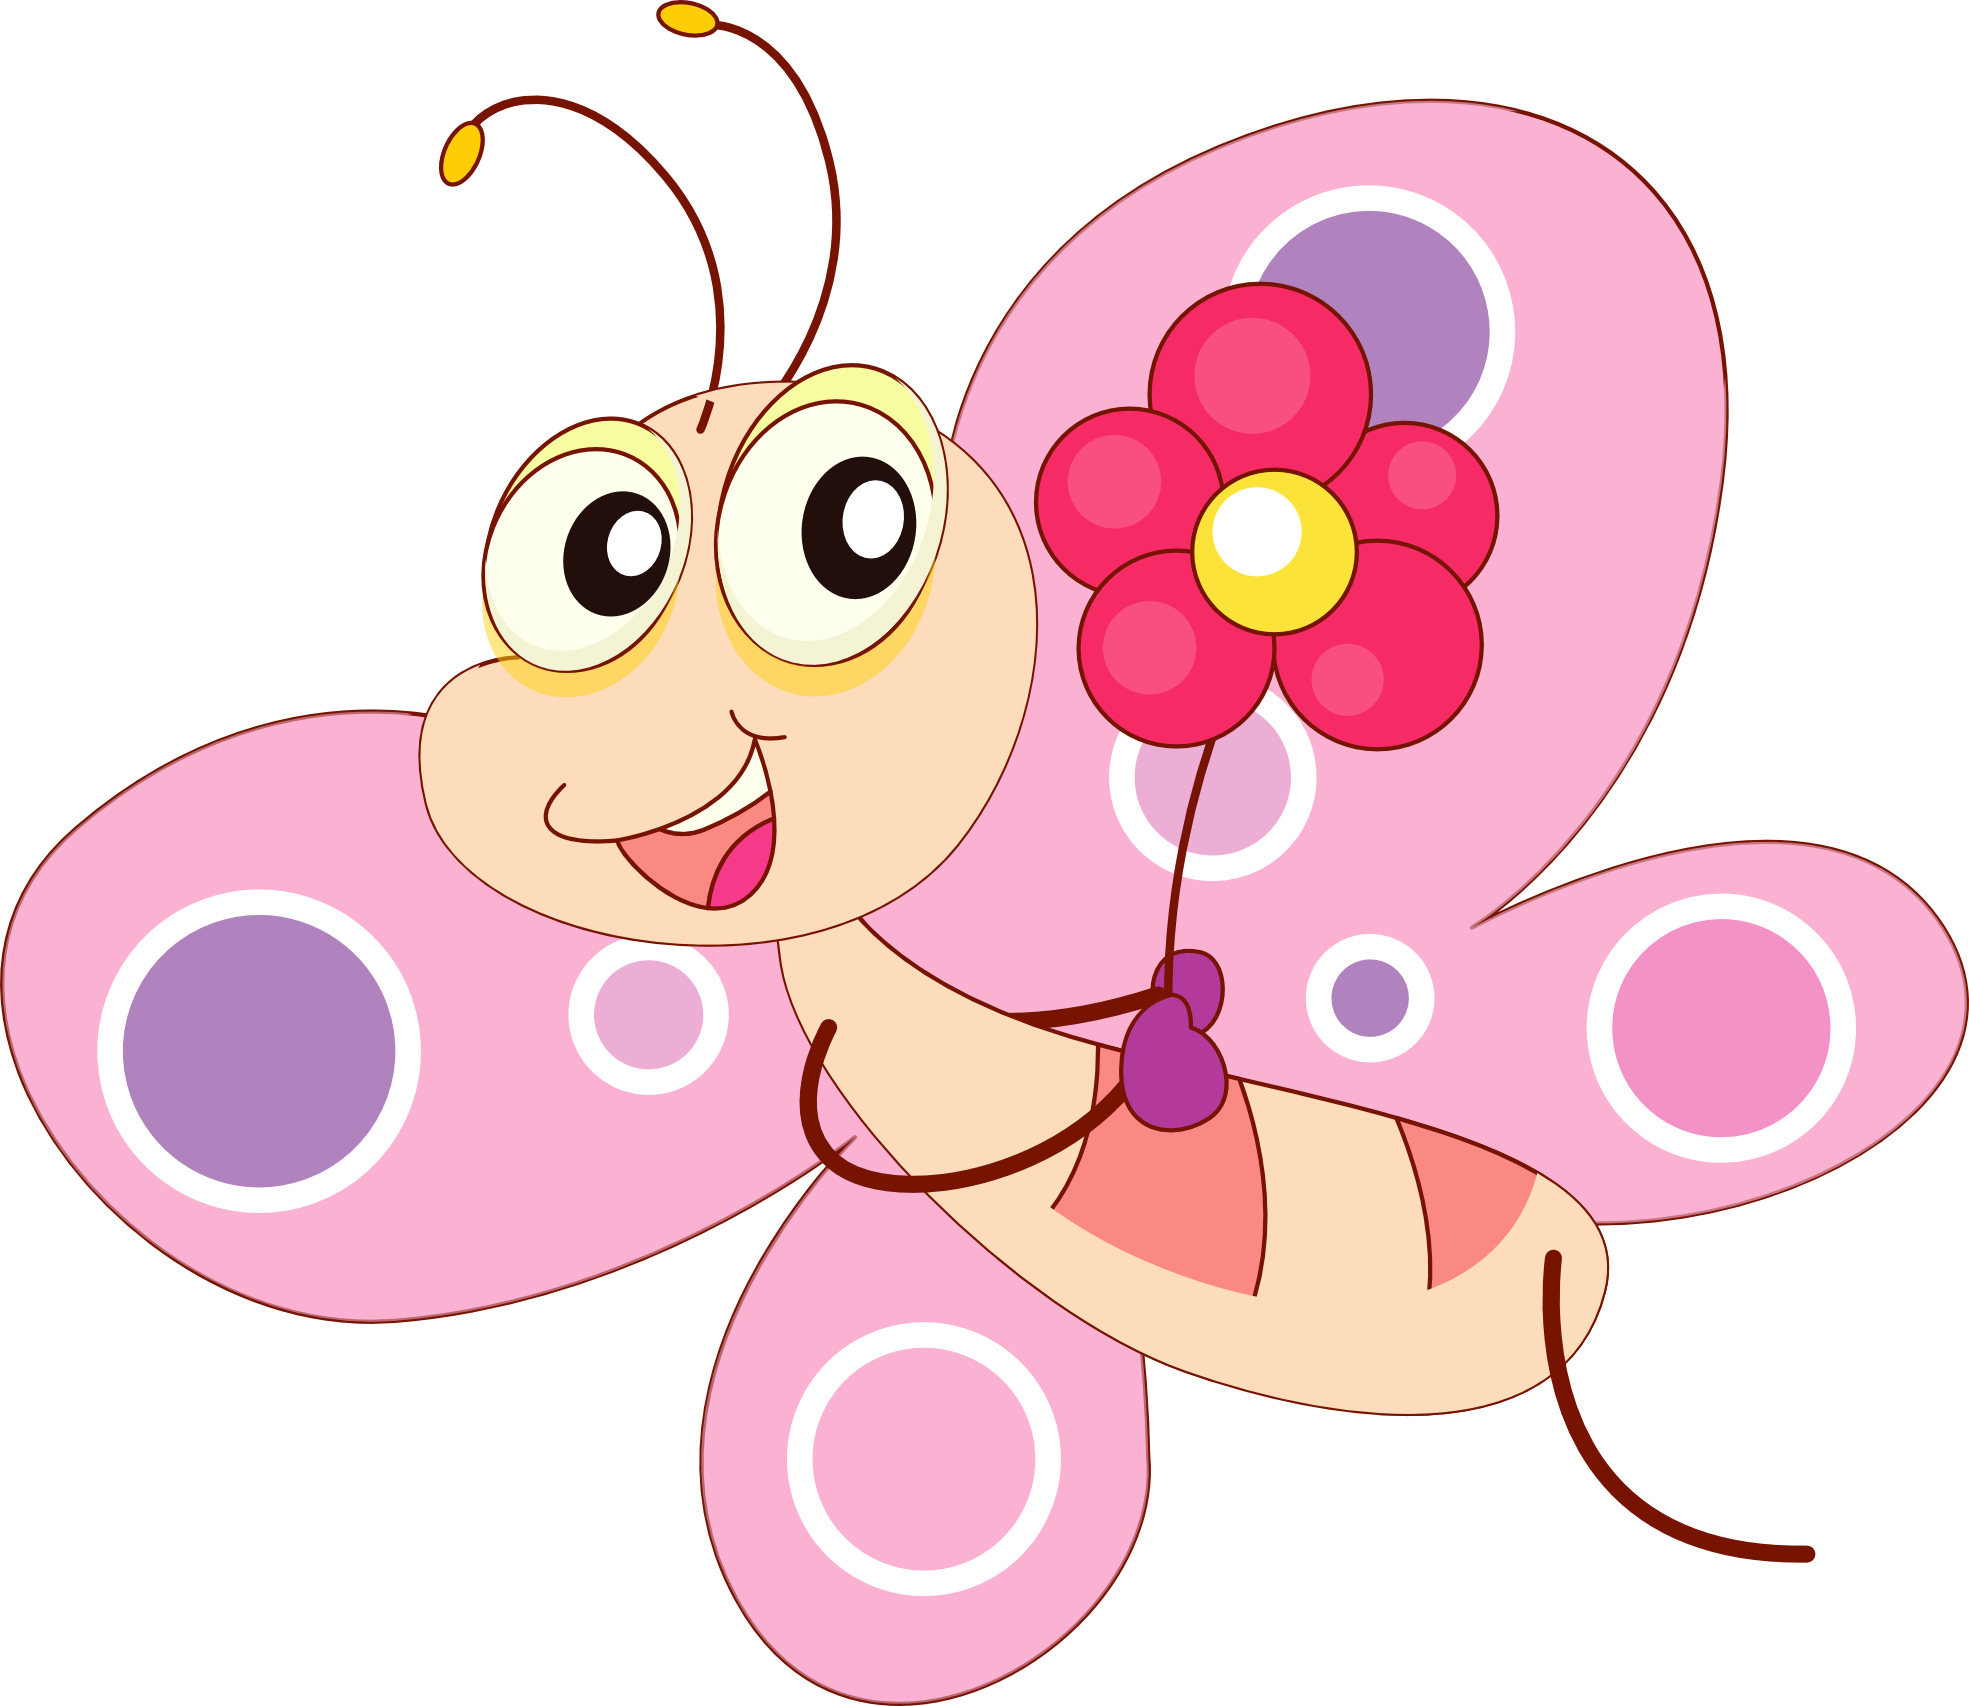 Free Cartoon Butterfly Images, Download Free Clip Art, Free